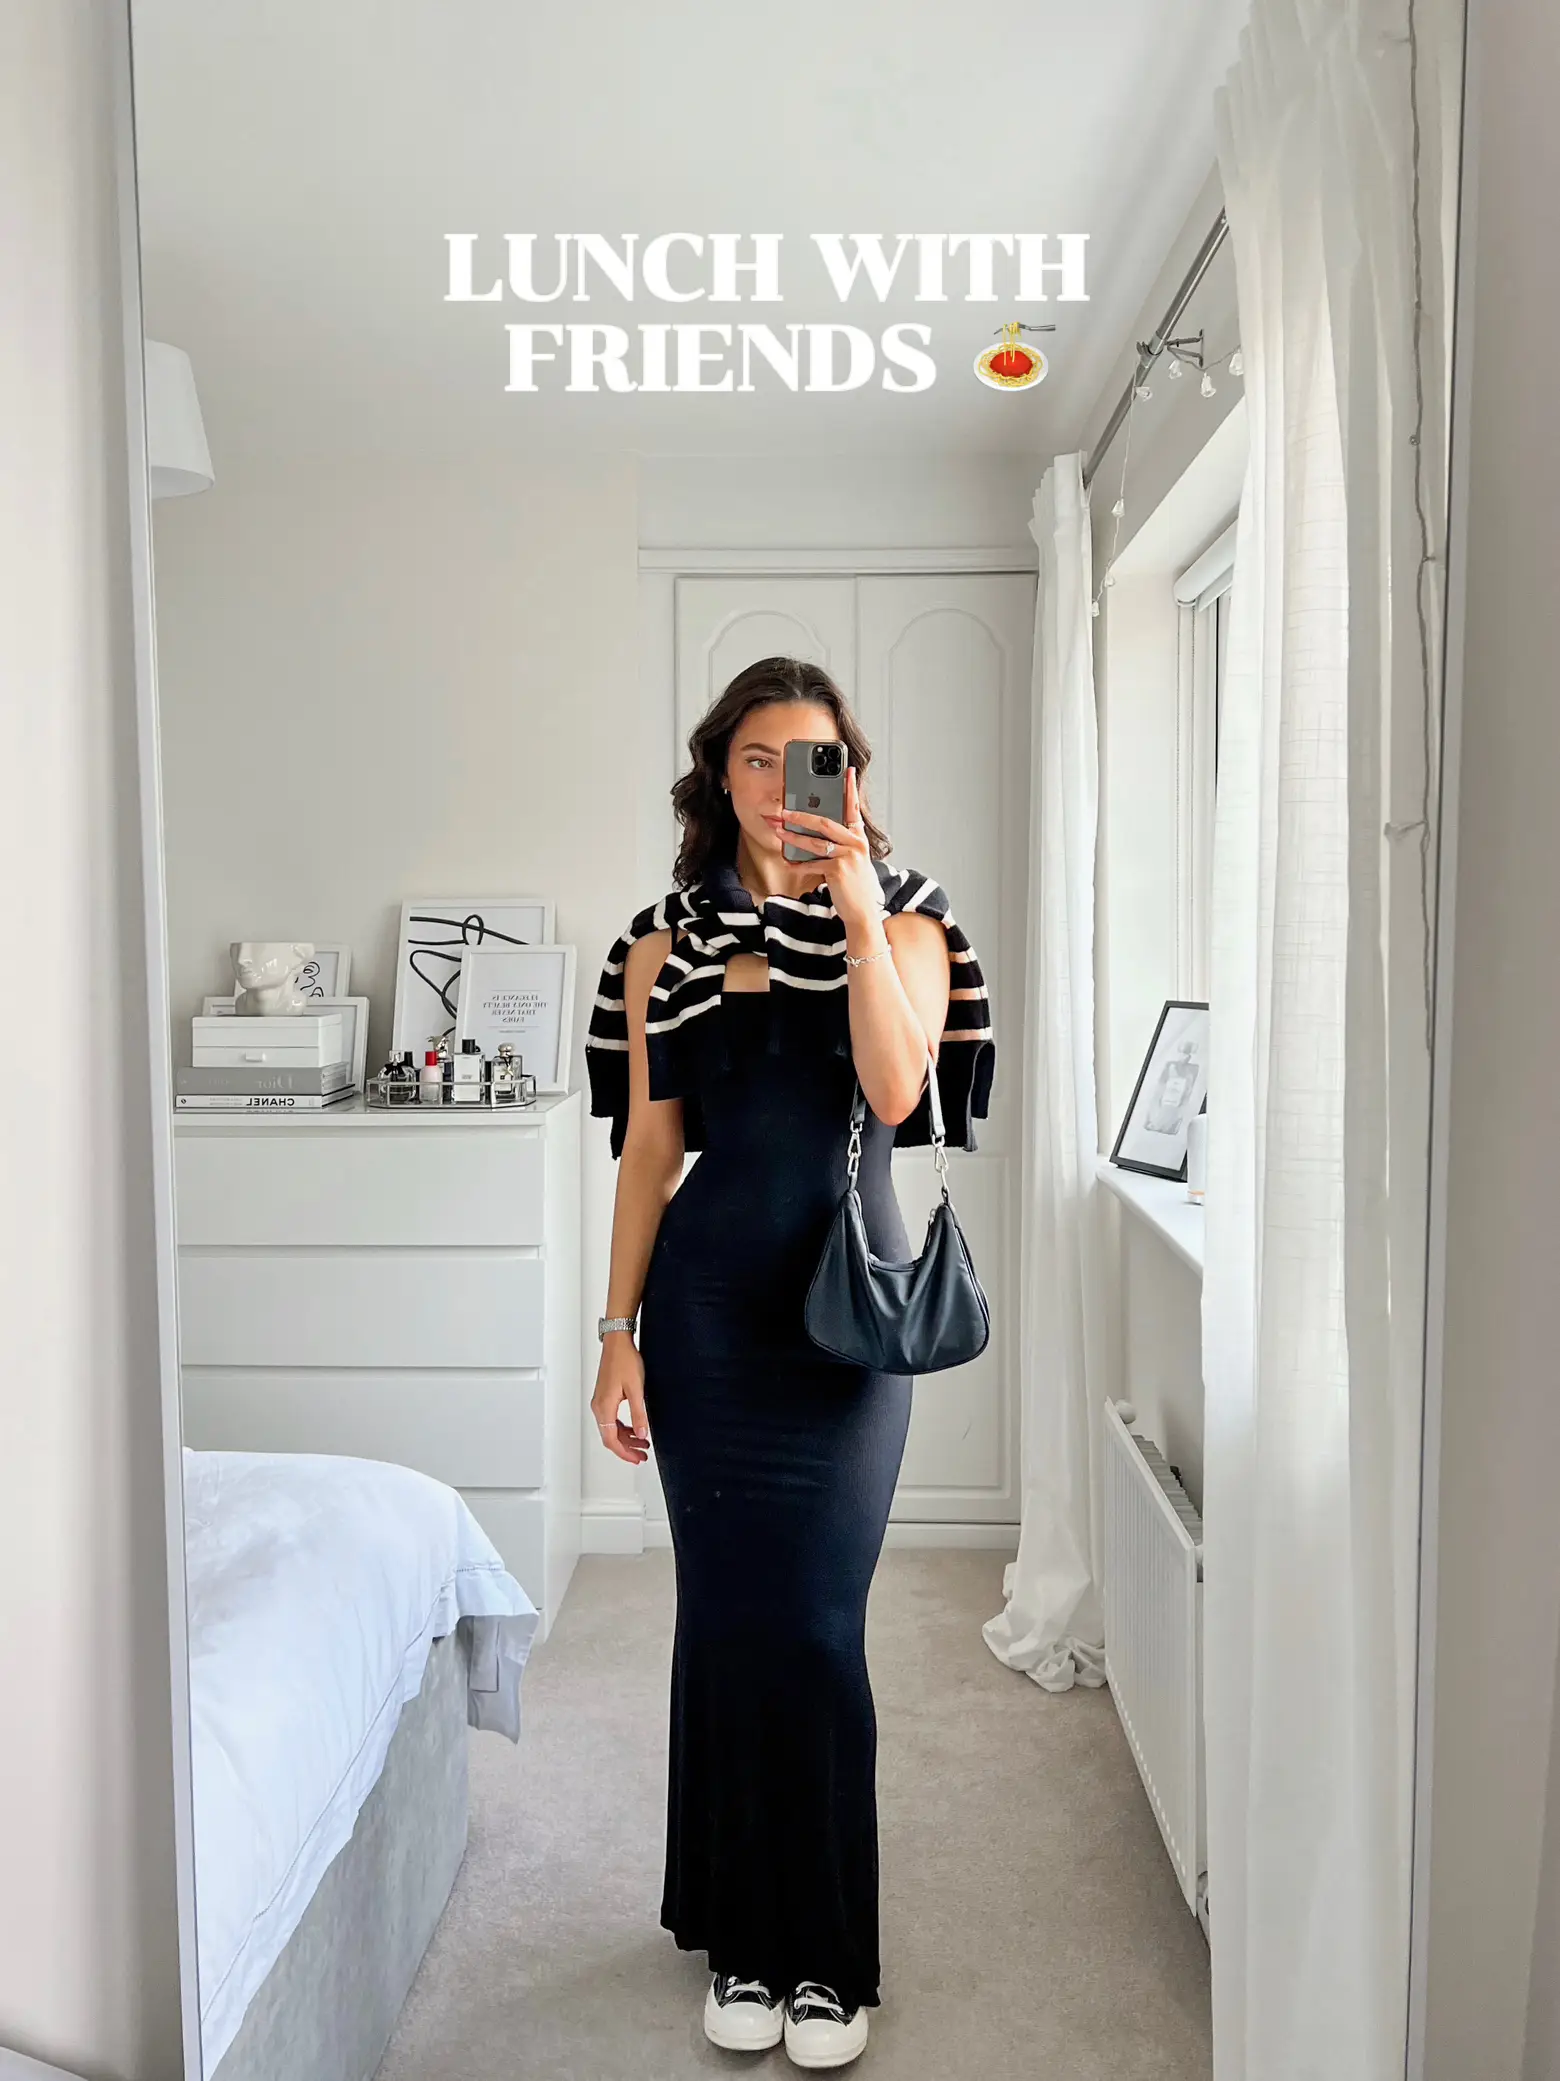 4 Casual Ways To Wear The VIRAL Skims Dress 🖤, Gallery posted by Lydia  Fleur